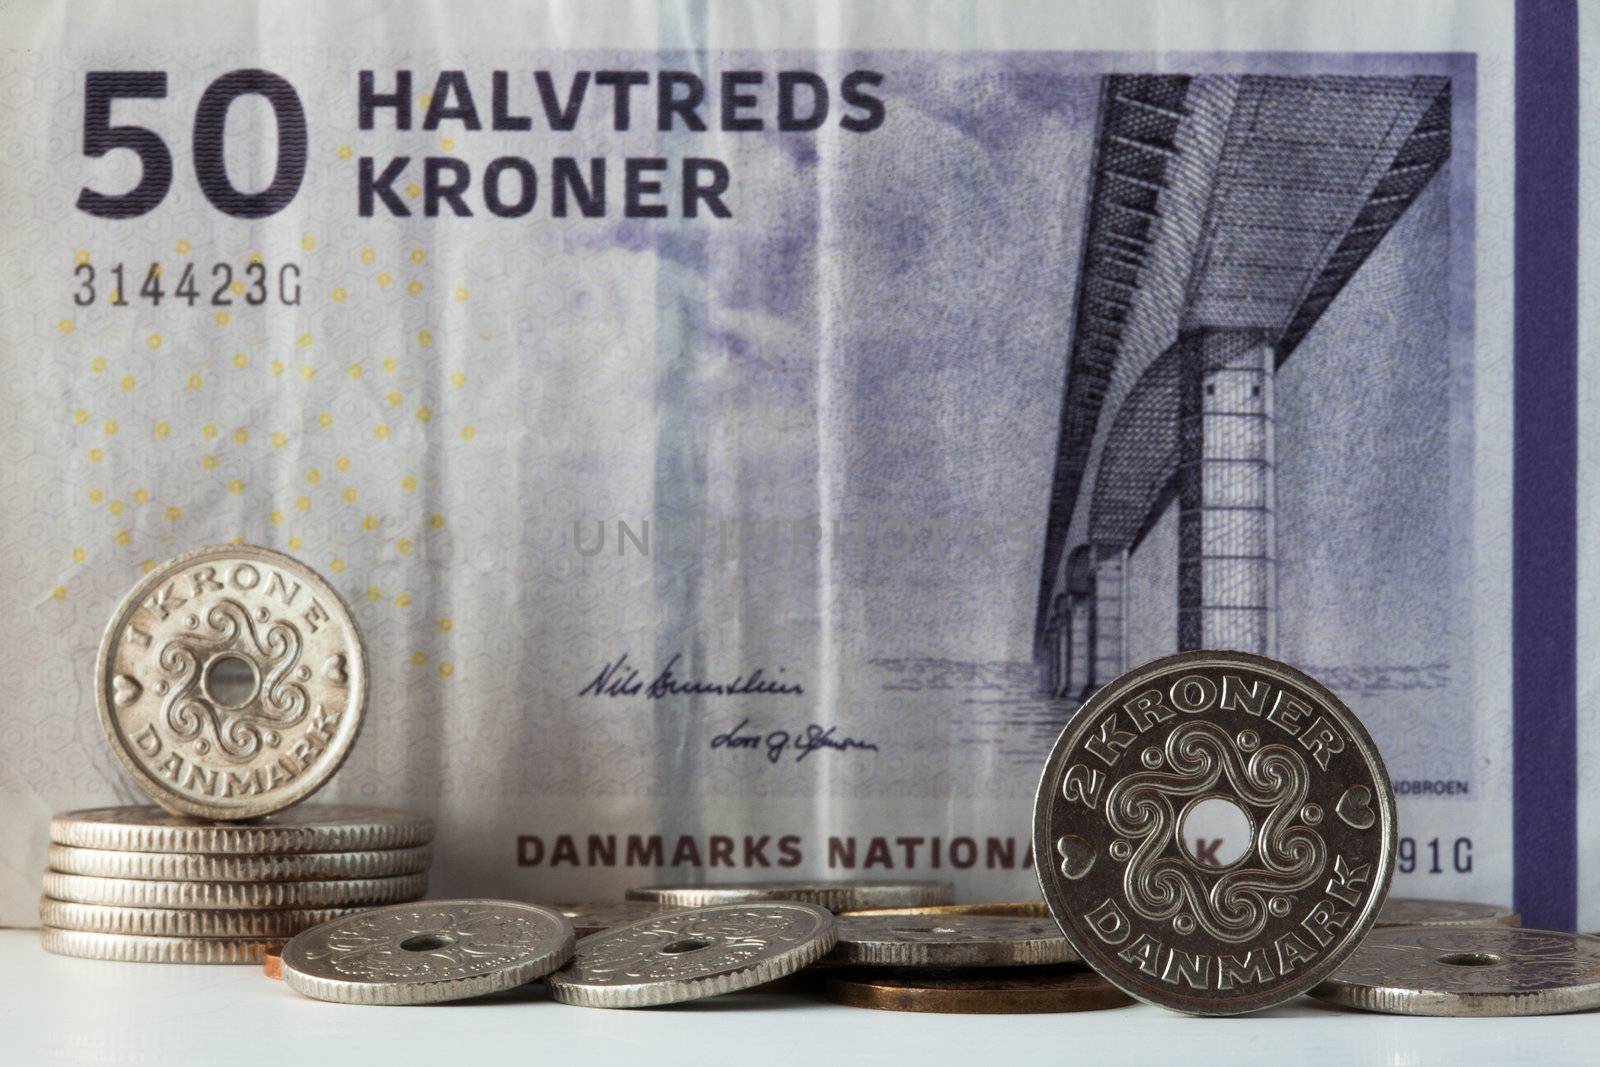 The different Danish currency